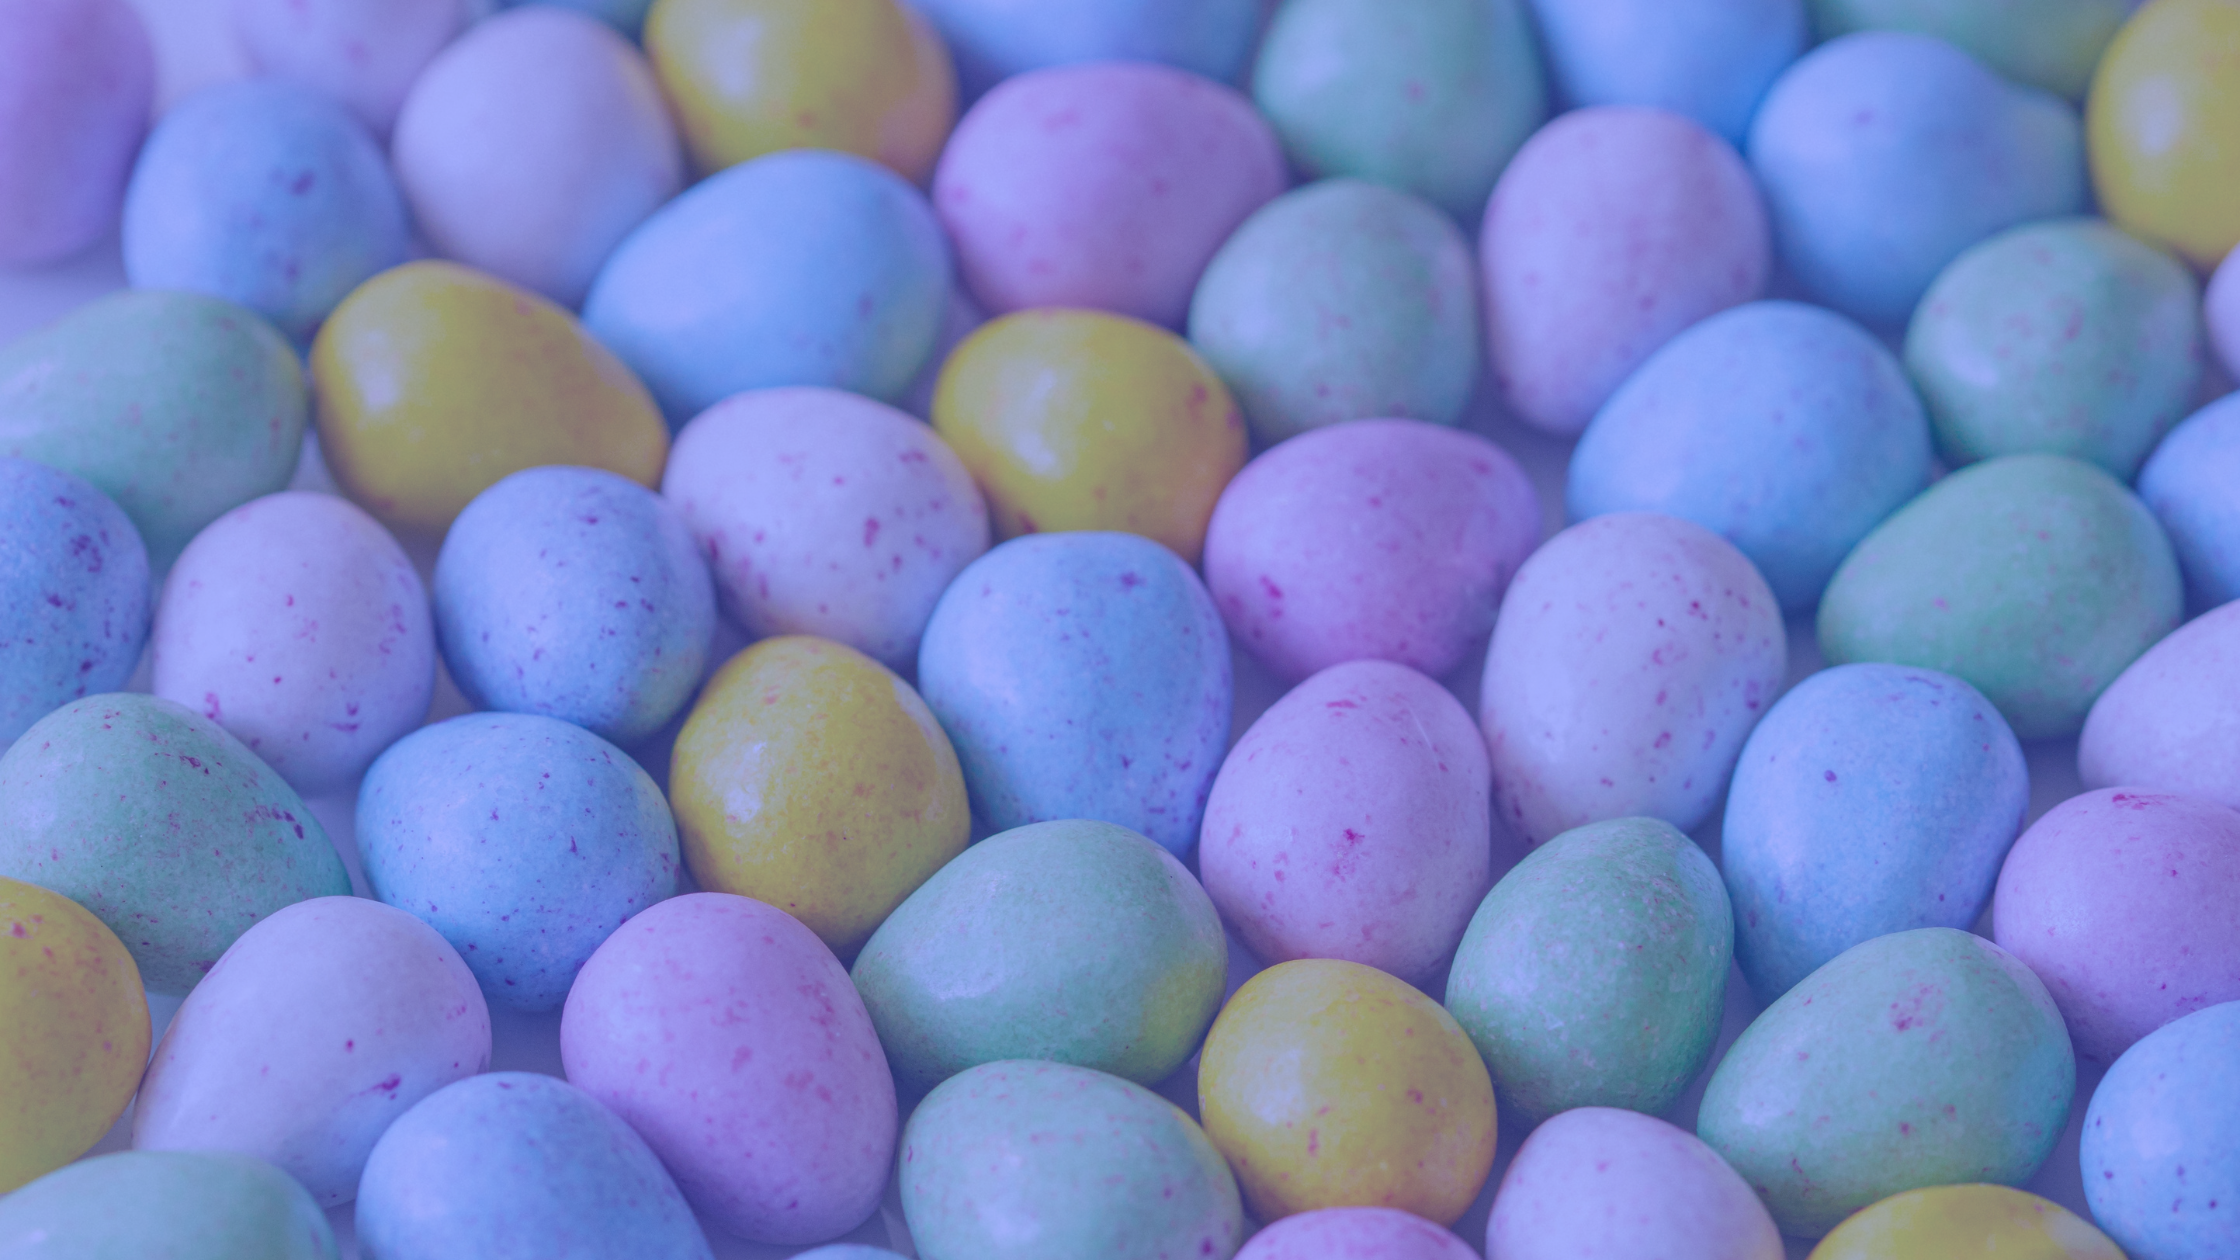 5 unusual Easter traditions around the world